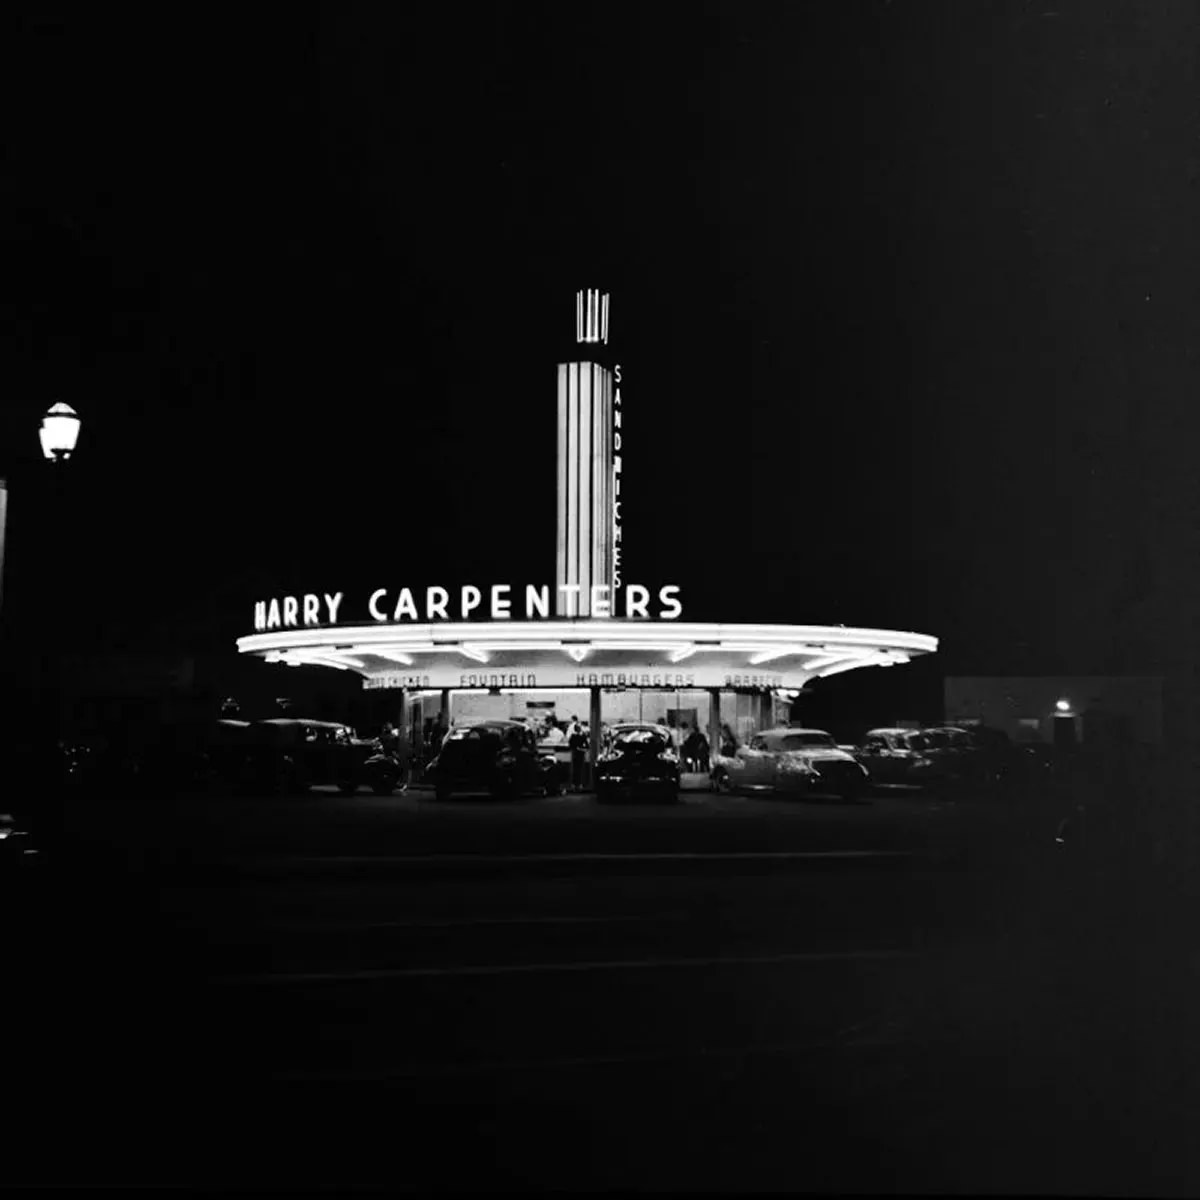 A neon sign at a drive-in restaurant in Hollywood, California, 1942.